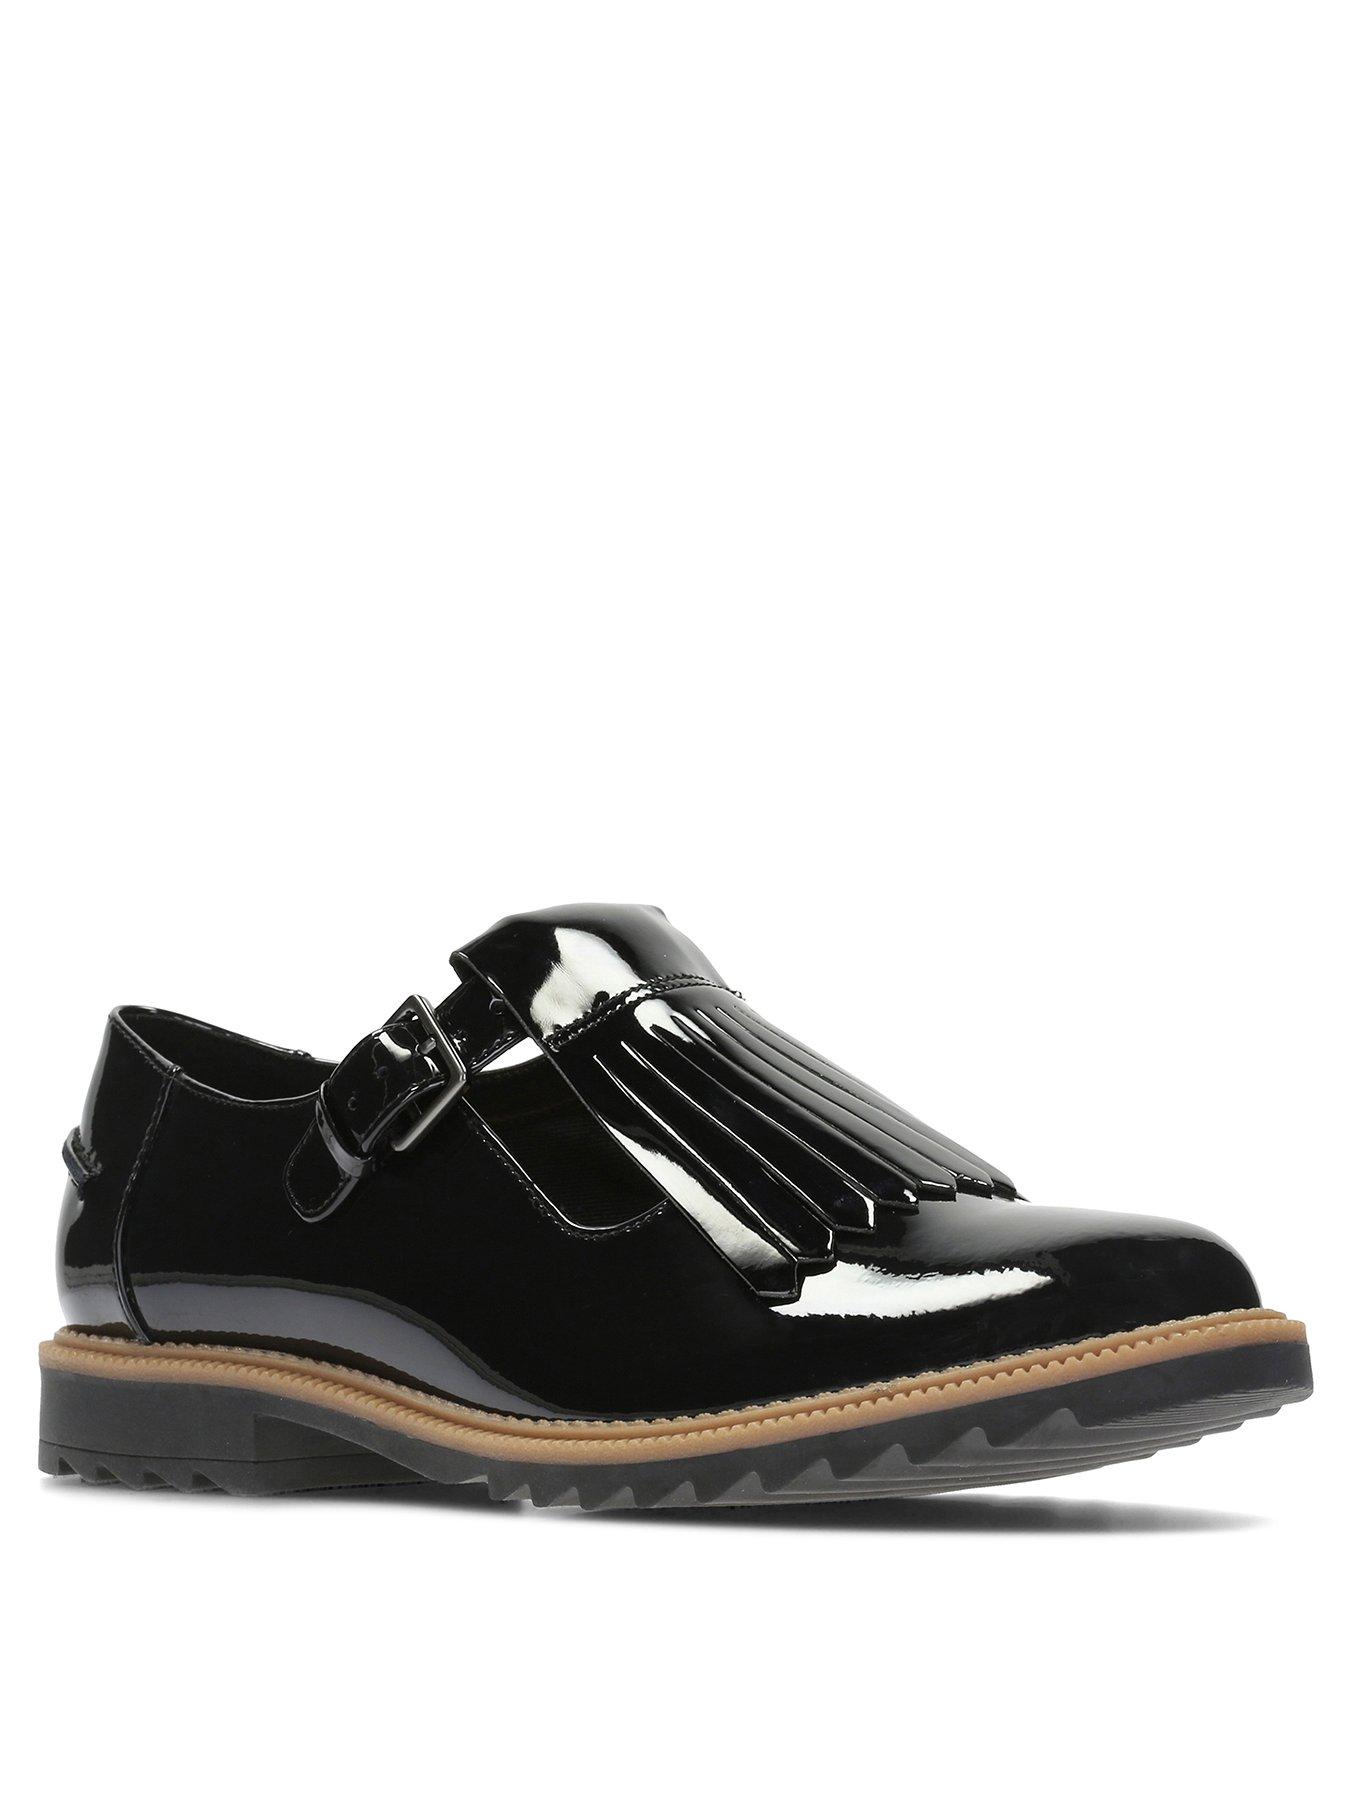 clarks shoes coupon code 219